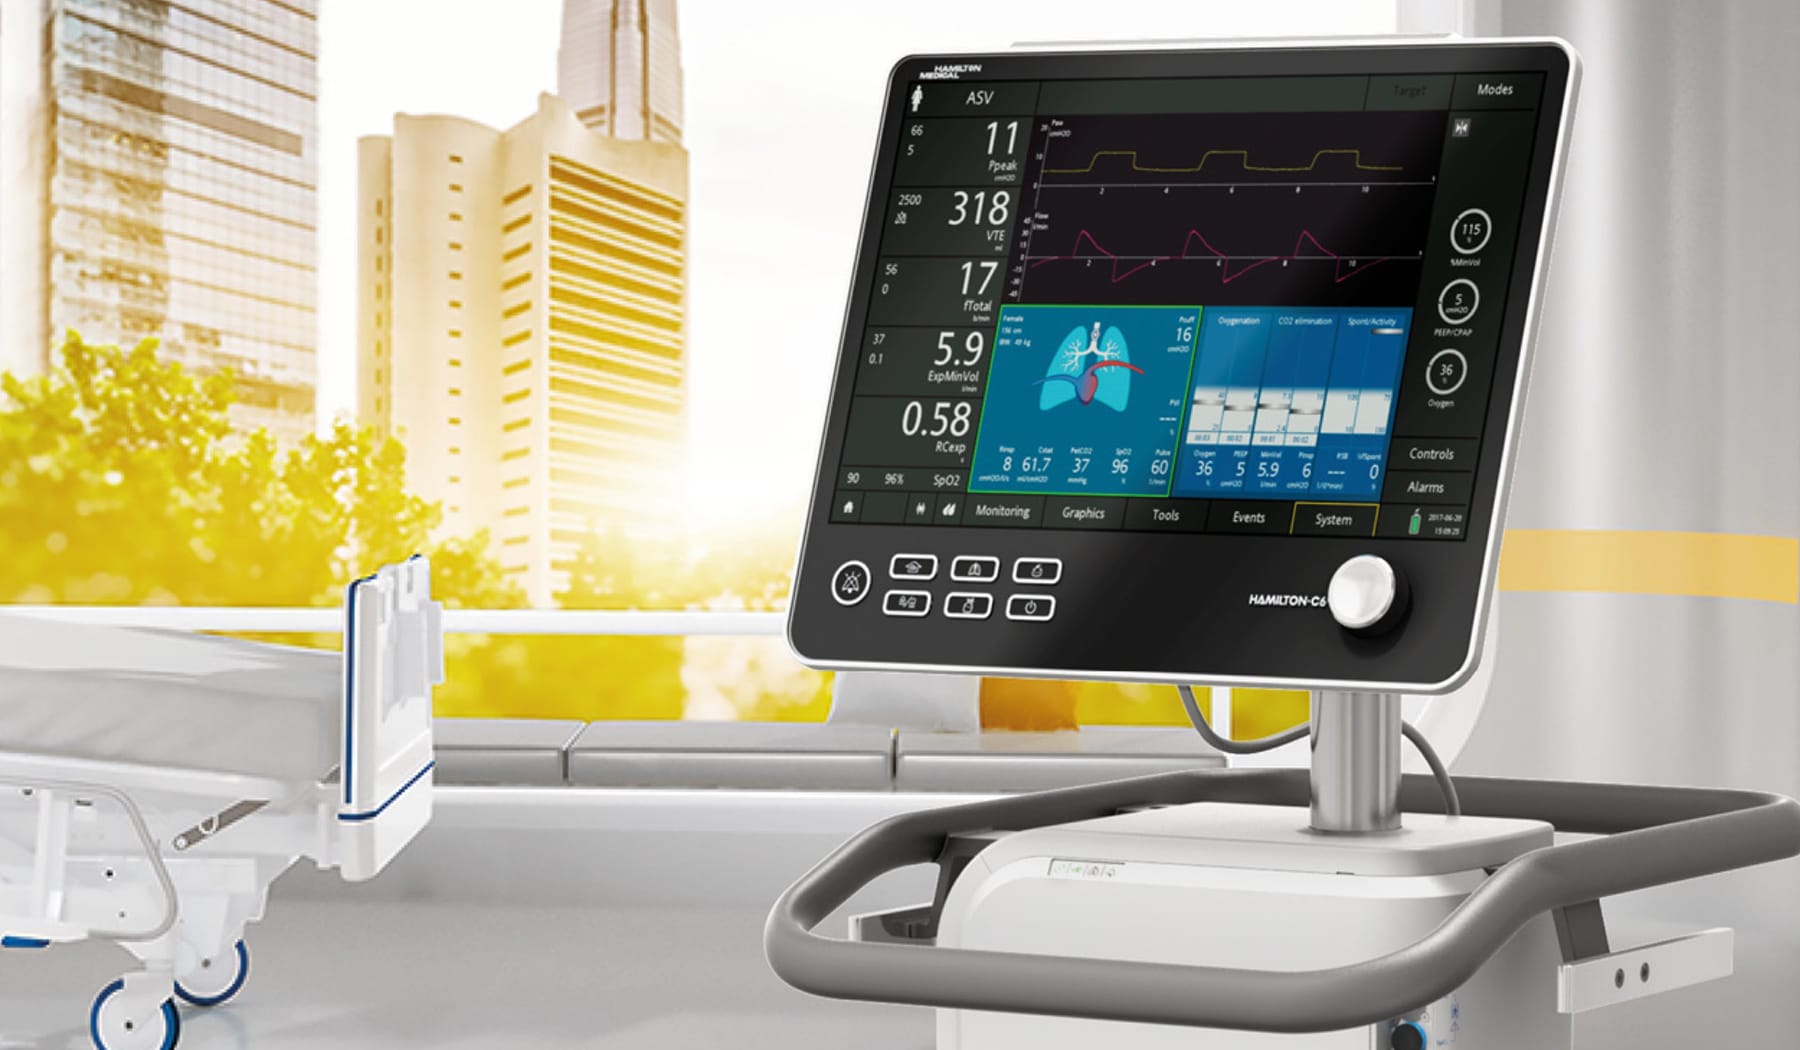 A realistic simulator app helps medical workers master the Hamilton Medical C-6 ventilator's functions.